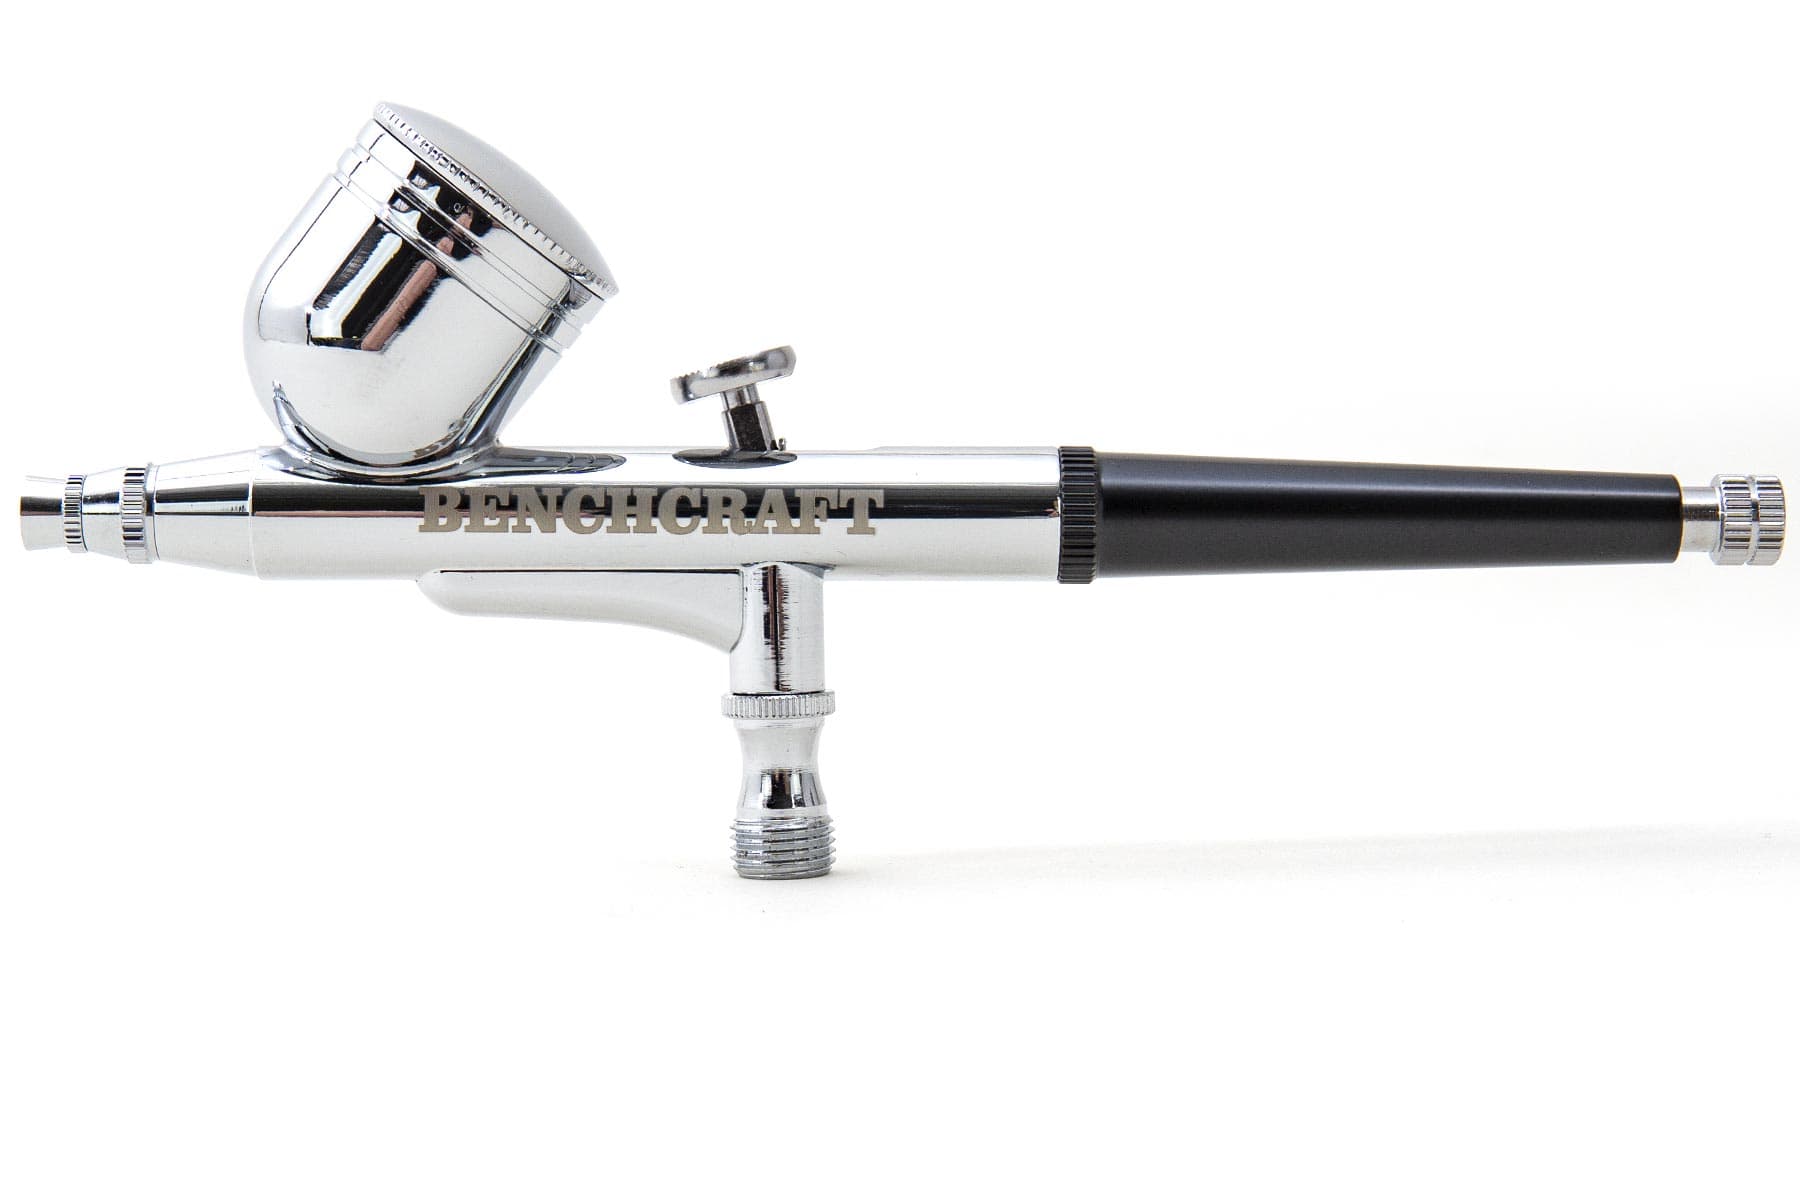 Benchcraft Double Action, Gravity Fed Airbrush 7cc BCT5025-008